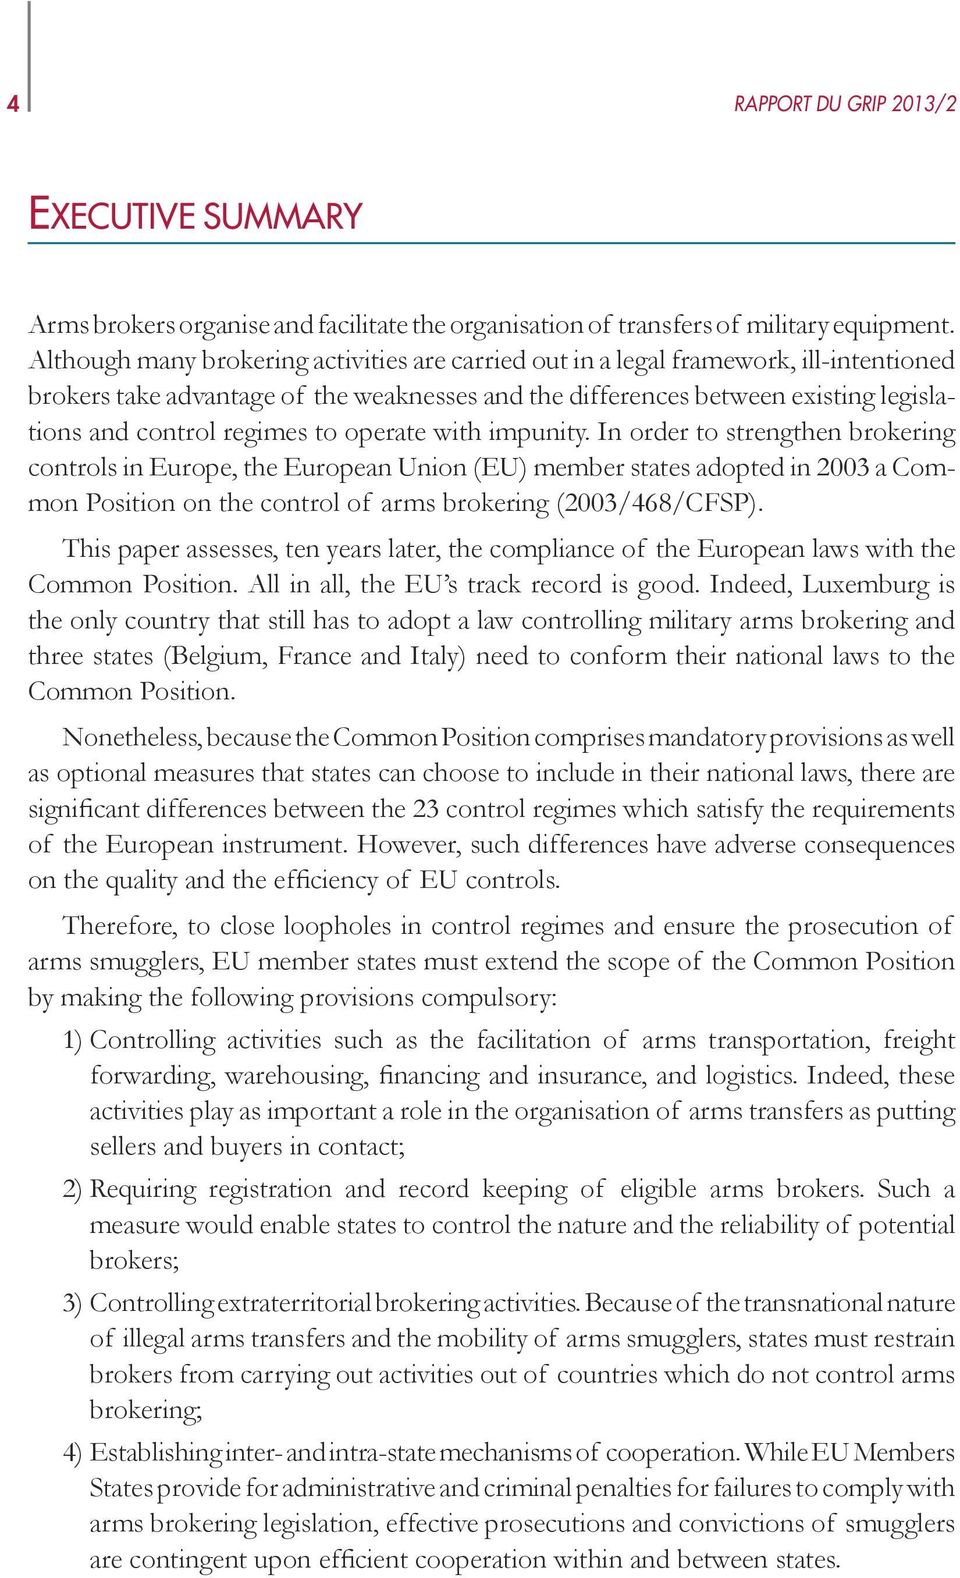 to operate with impunity. In order to strengthen brokering controls in Europe, the European Union (EU) member states adopted in 2003 a Common Position on the control of arms brokering (2003/468/CFSP).